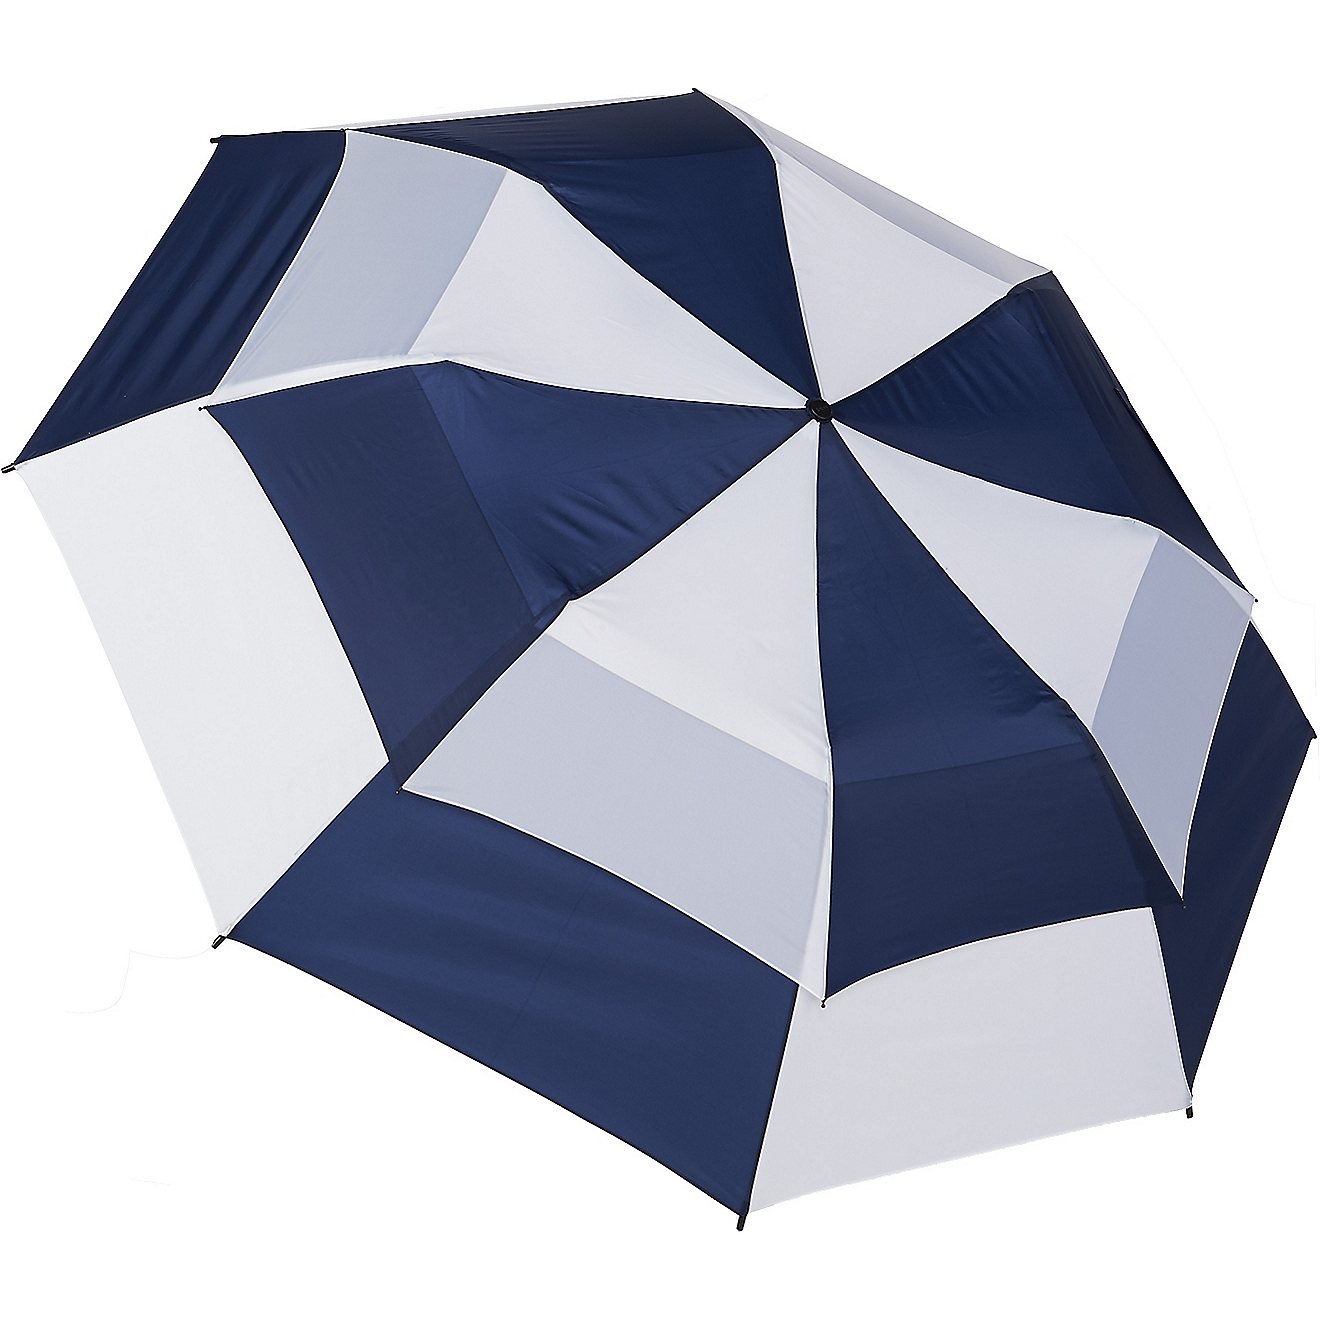 totes Adults' totesport Golf Size Auto Vented Canopy Umbrella                                                                    - view number 1